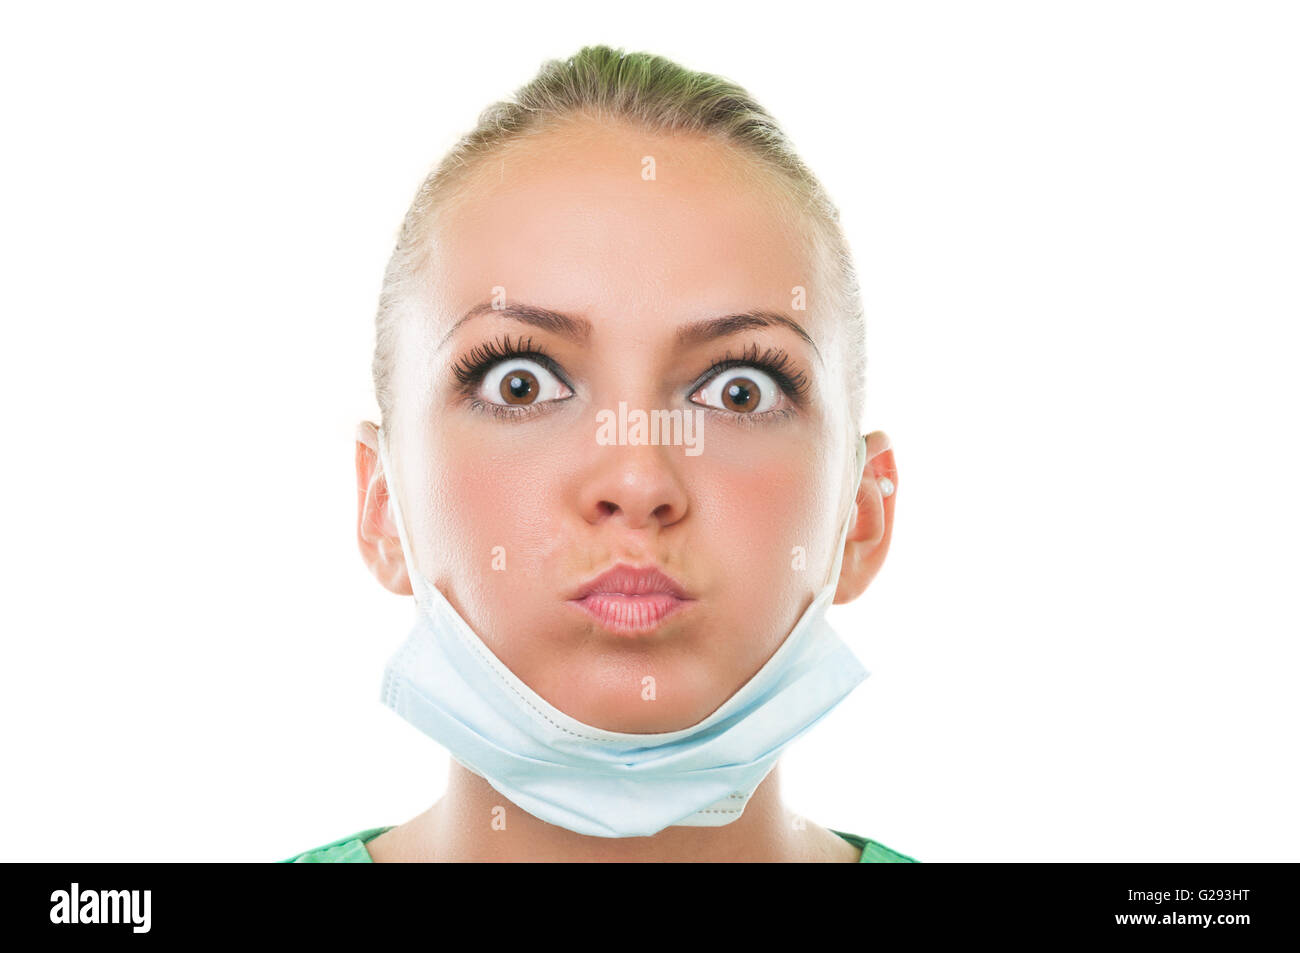 Beautiful dentist assistant making funny face Stock Photo